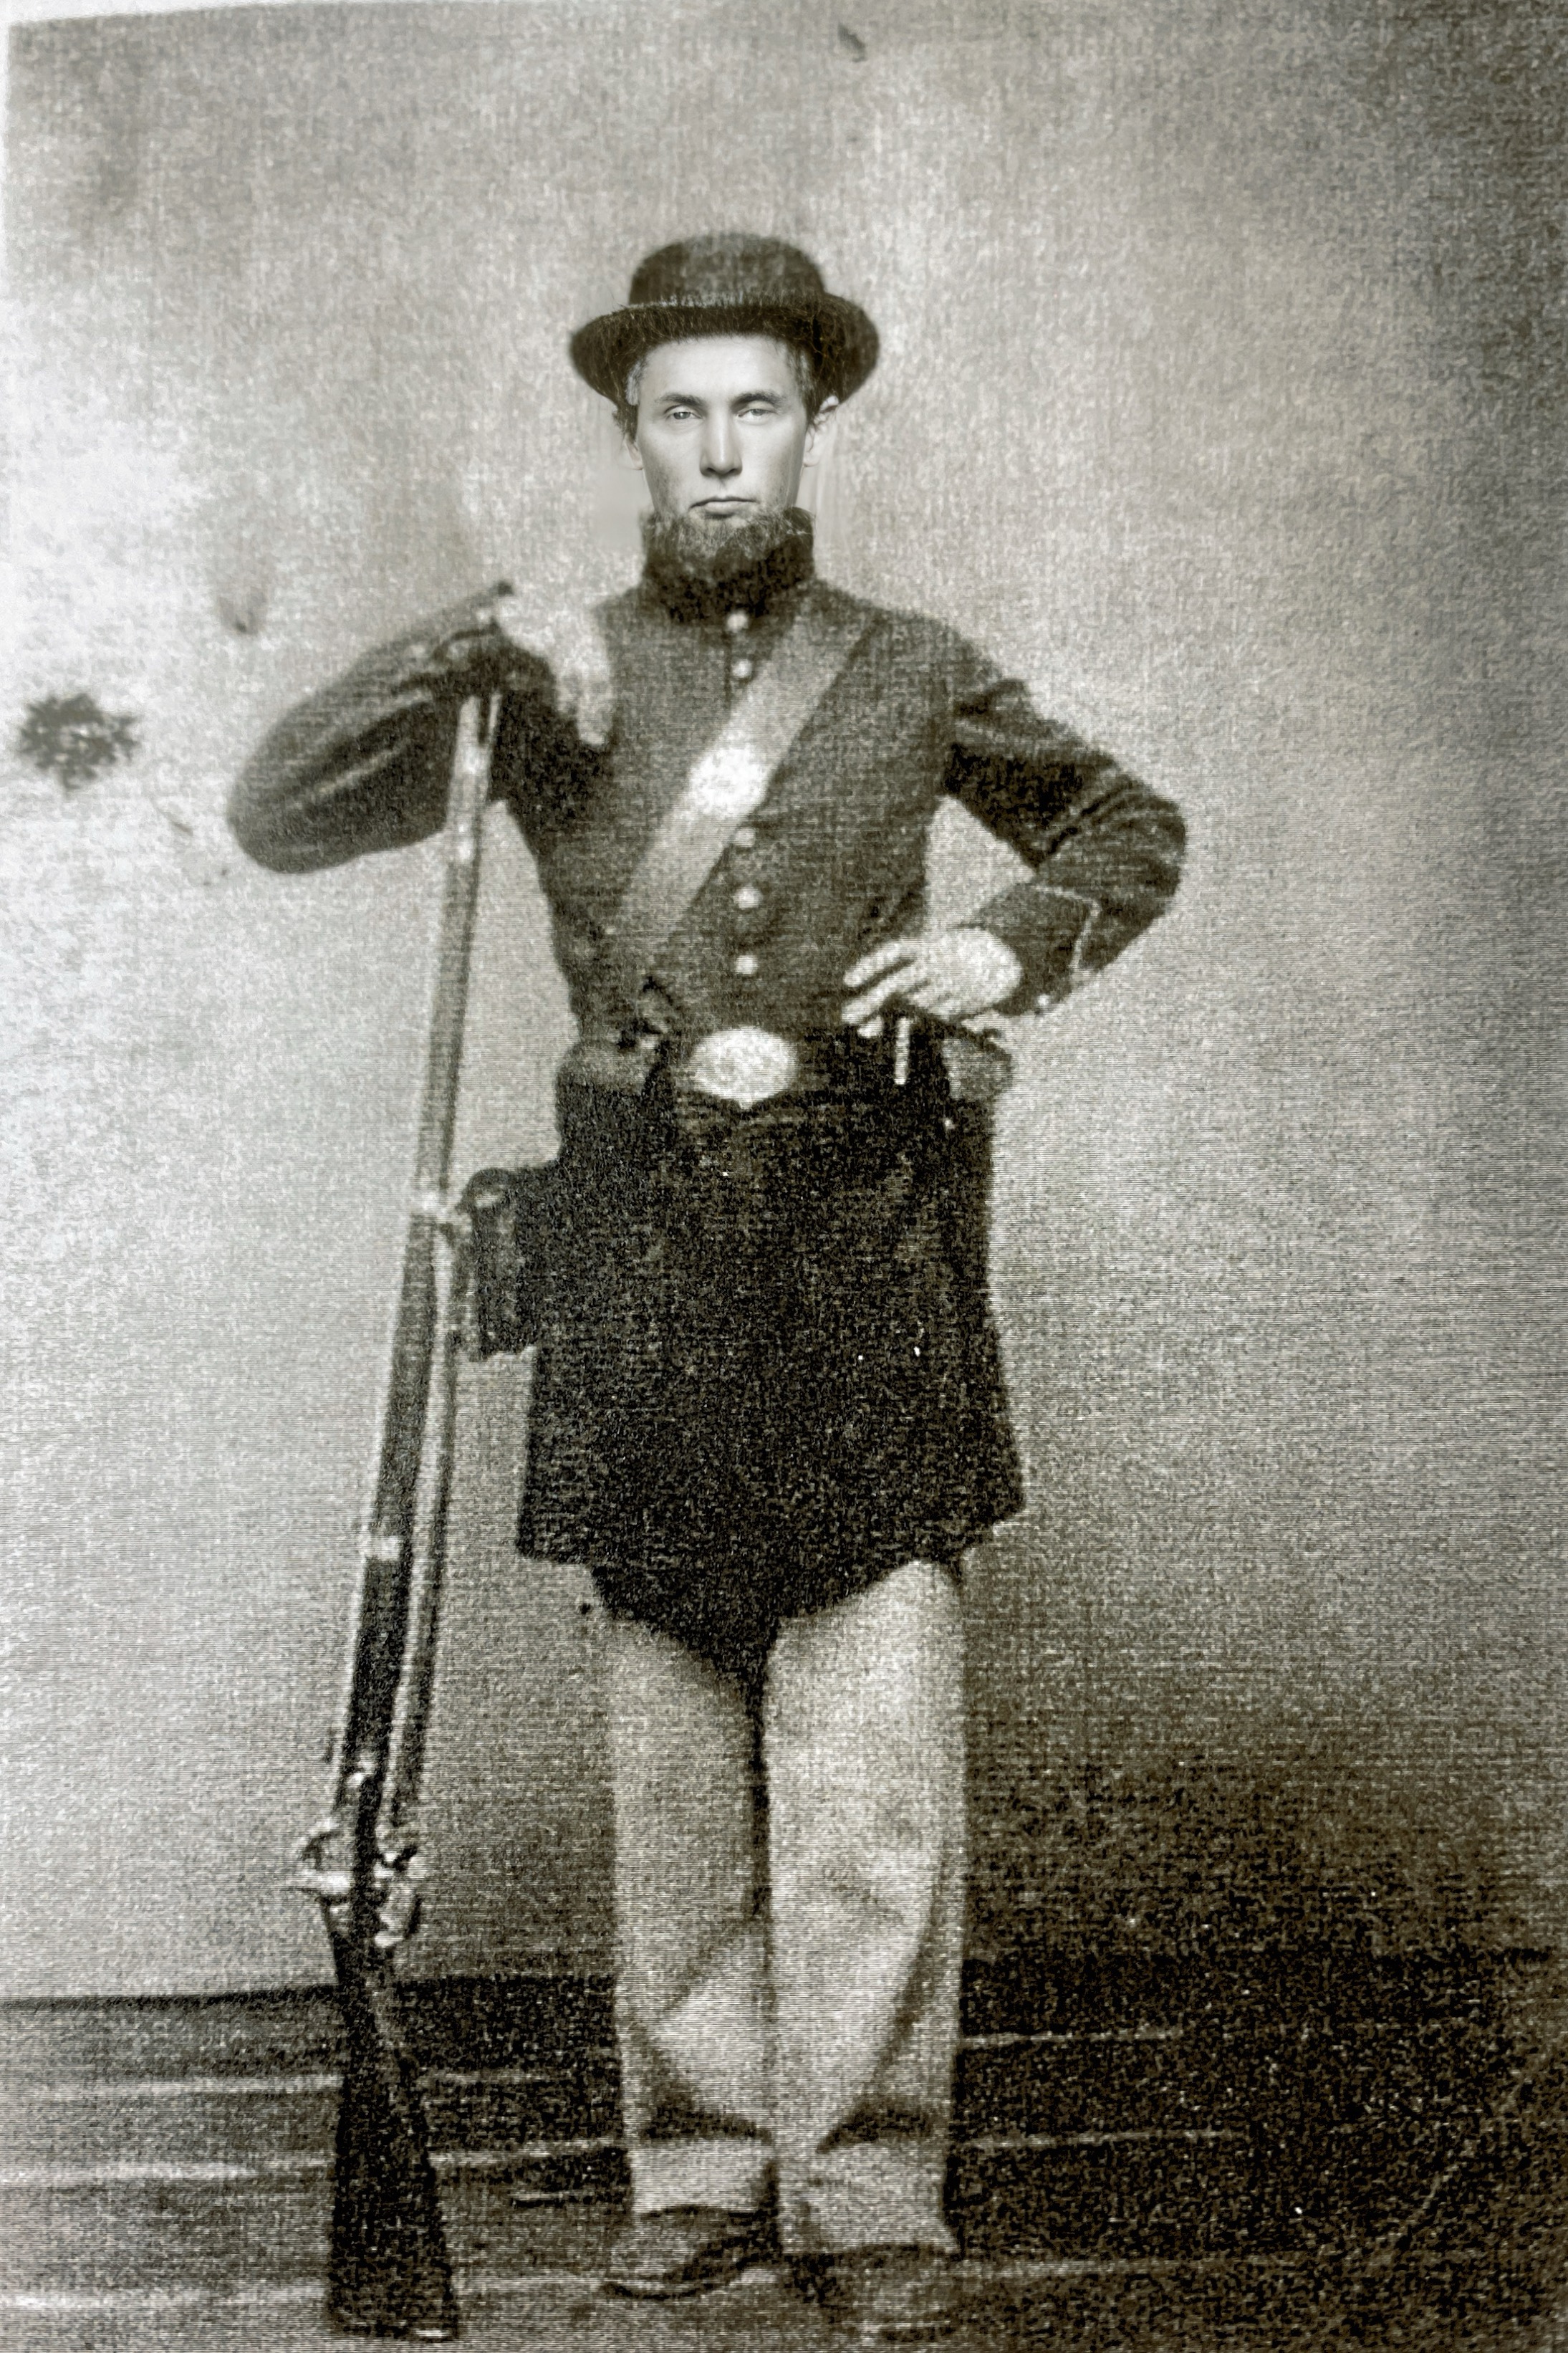 Samuel A. McKay discharged from the Grand Army of the Republic Oct 4, 1864